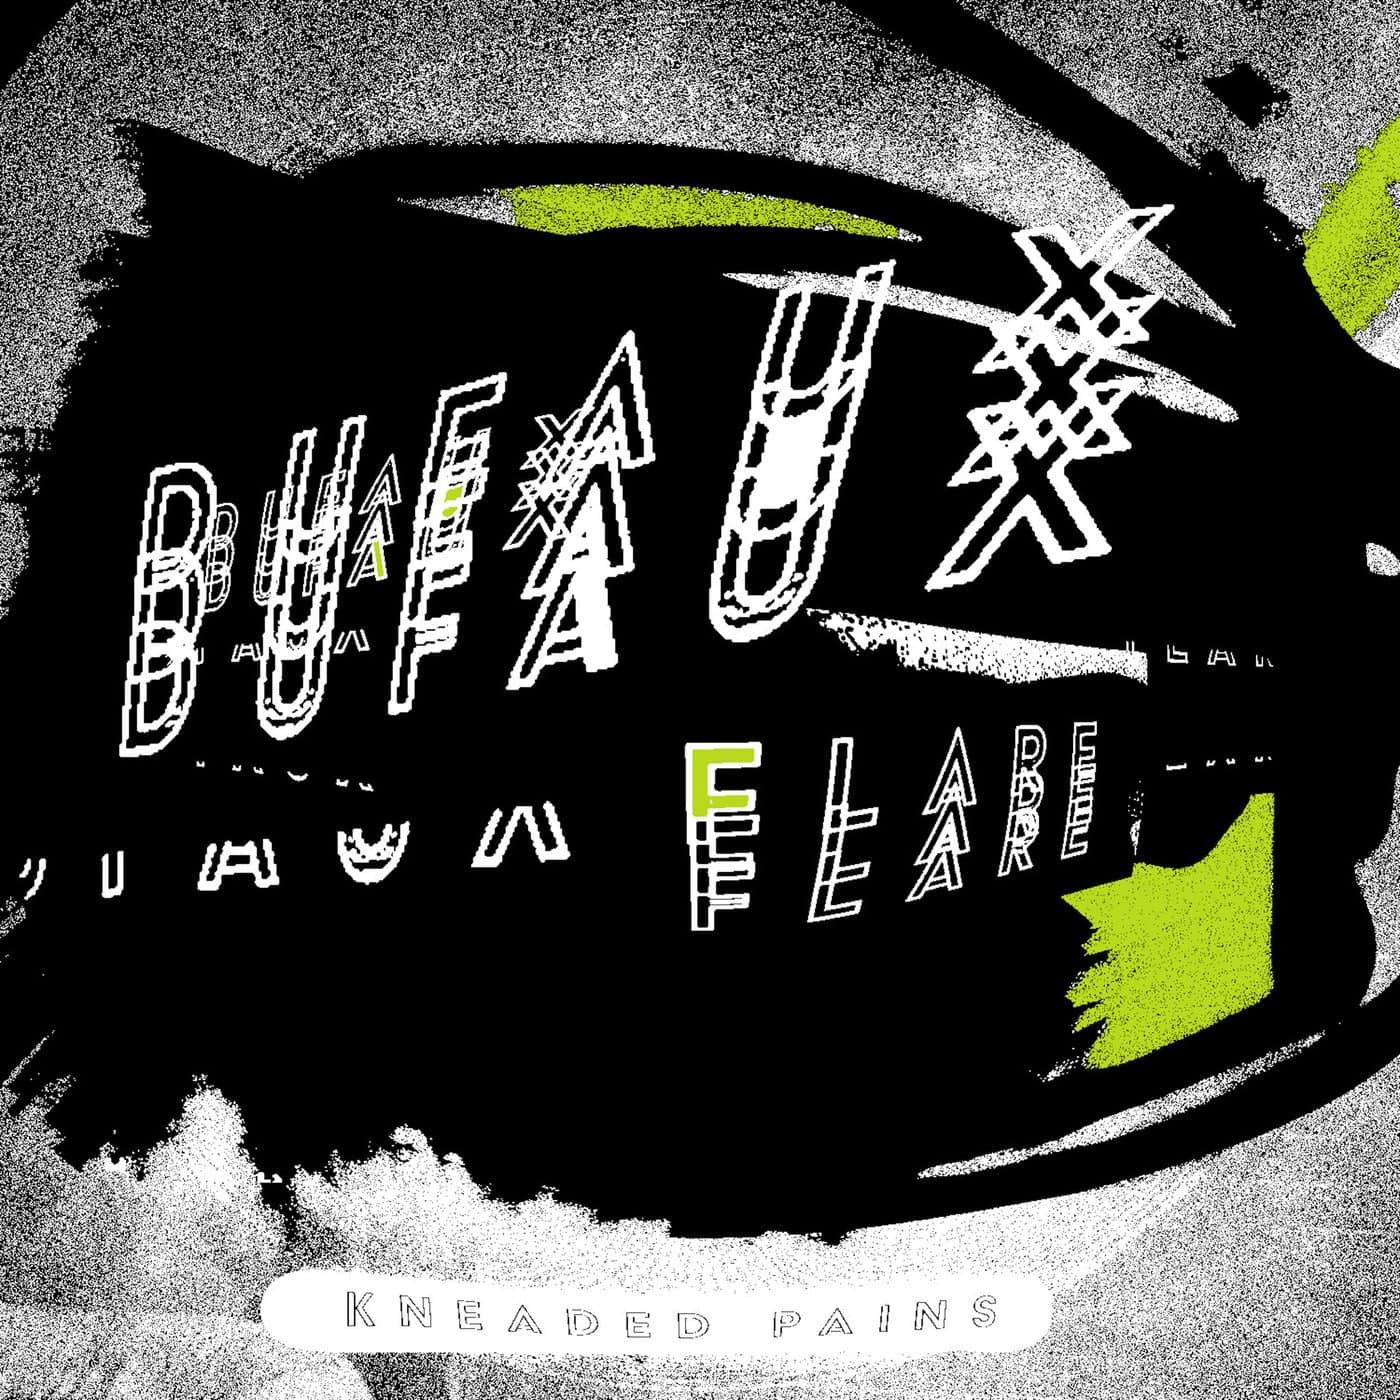 Download DUFAUX - Flare on Electrobuzz